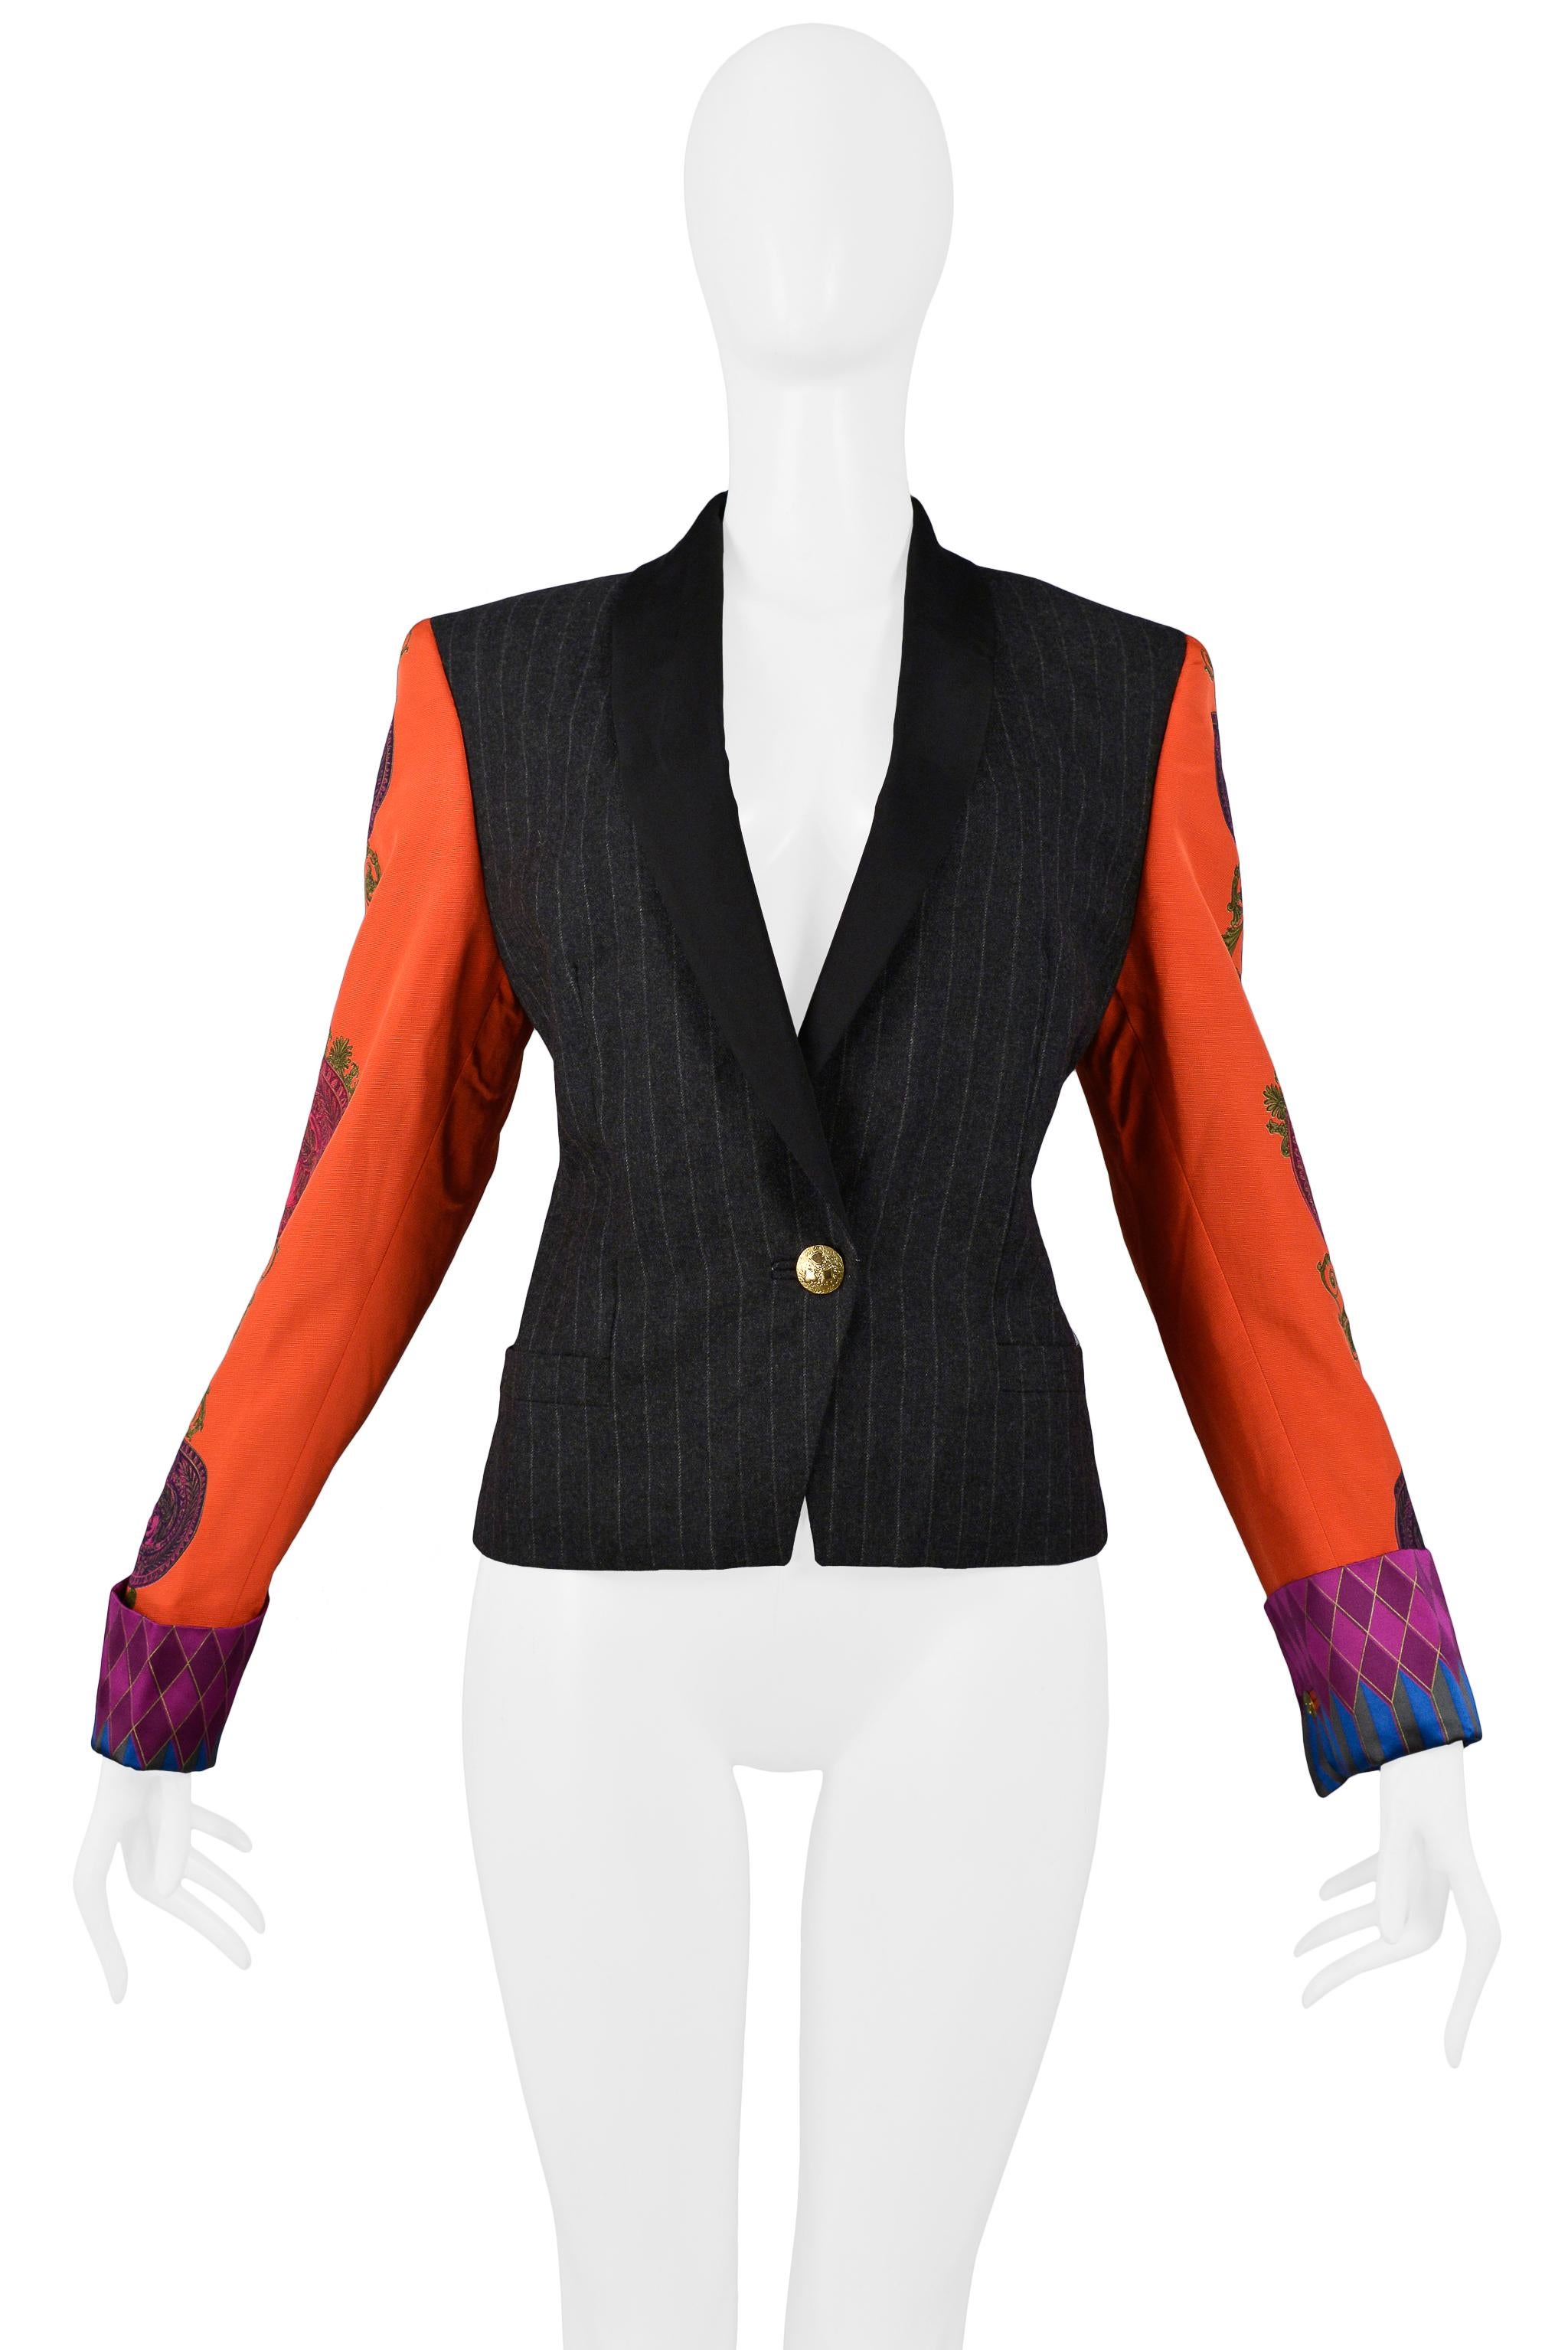 Resurrection Vintage is excited to offer a vintage Versace Couture blazer featuring a wool pinstripe bodice with solid lapels, one gold button closure, side pockets, and red sleeves with Baroque graphic prints and harlequin cuffs. 

Versace